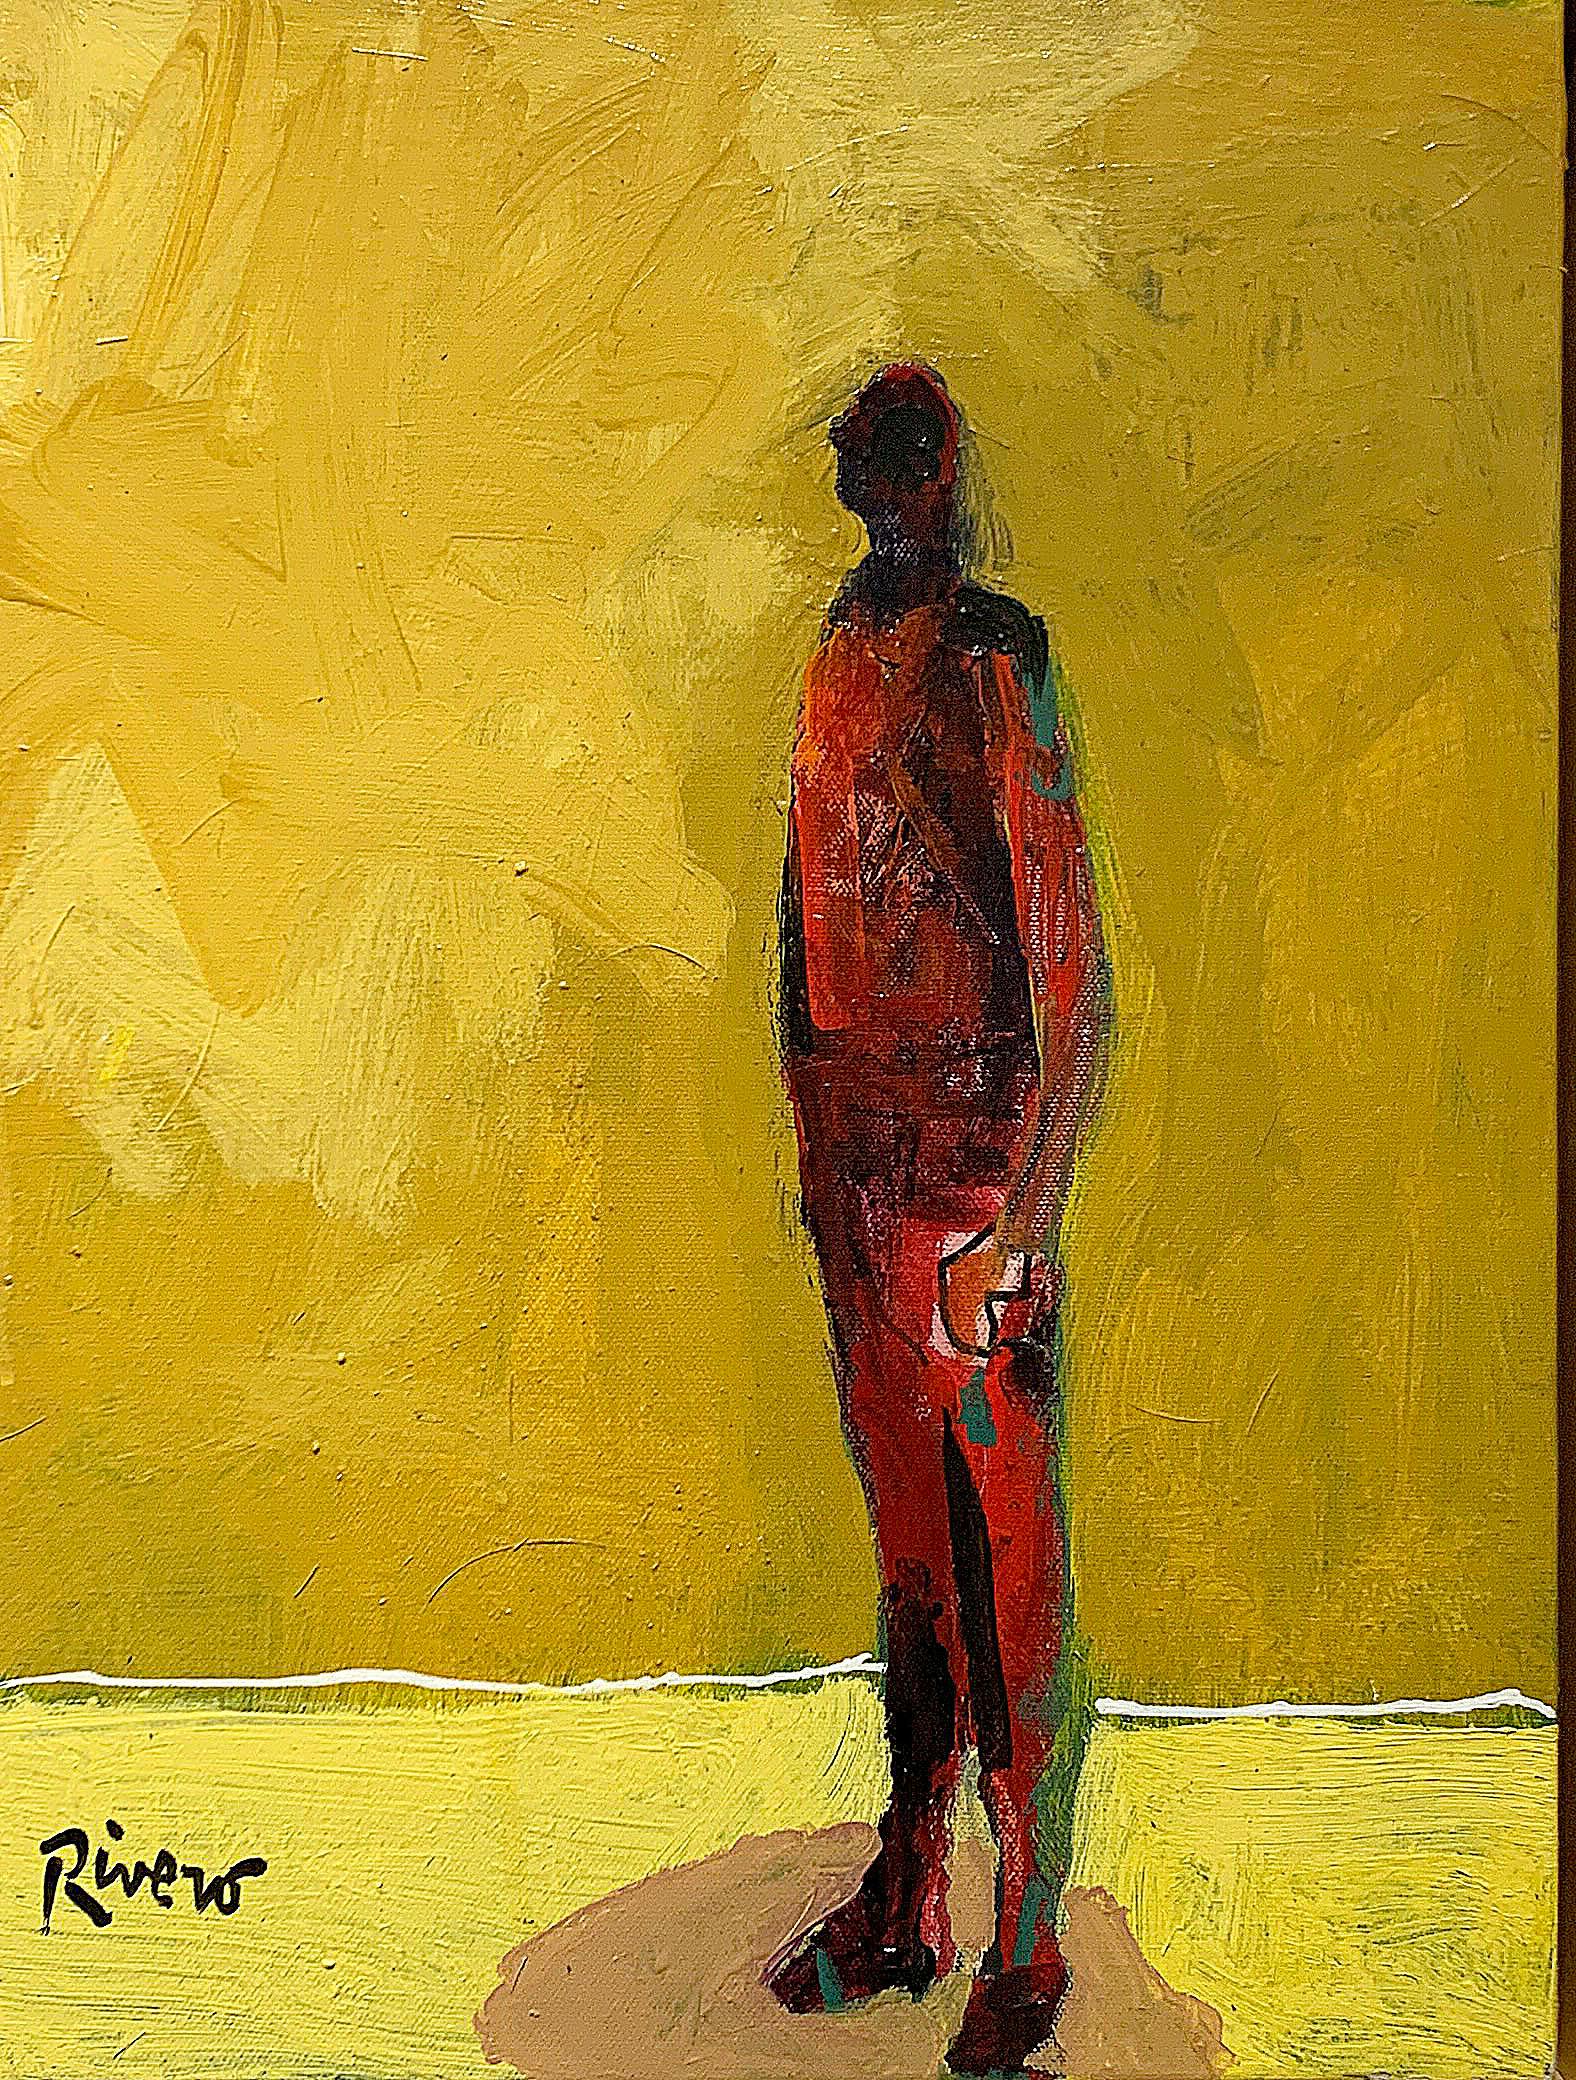 Mike Rivero  Figurative Painting - Personaje, figurative acrylic painting of man standing facing left